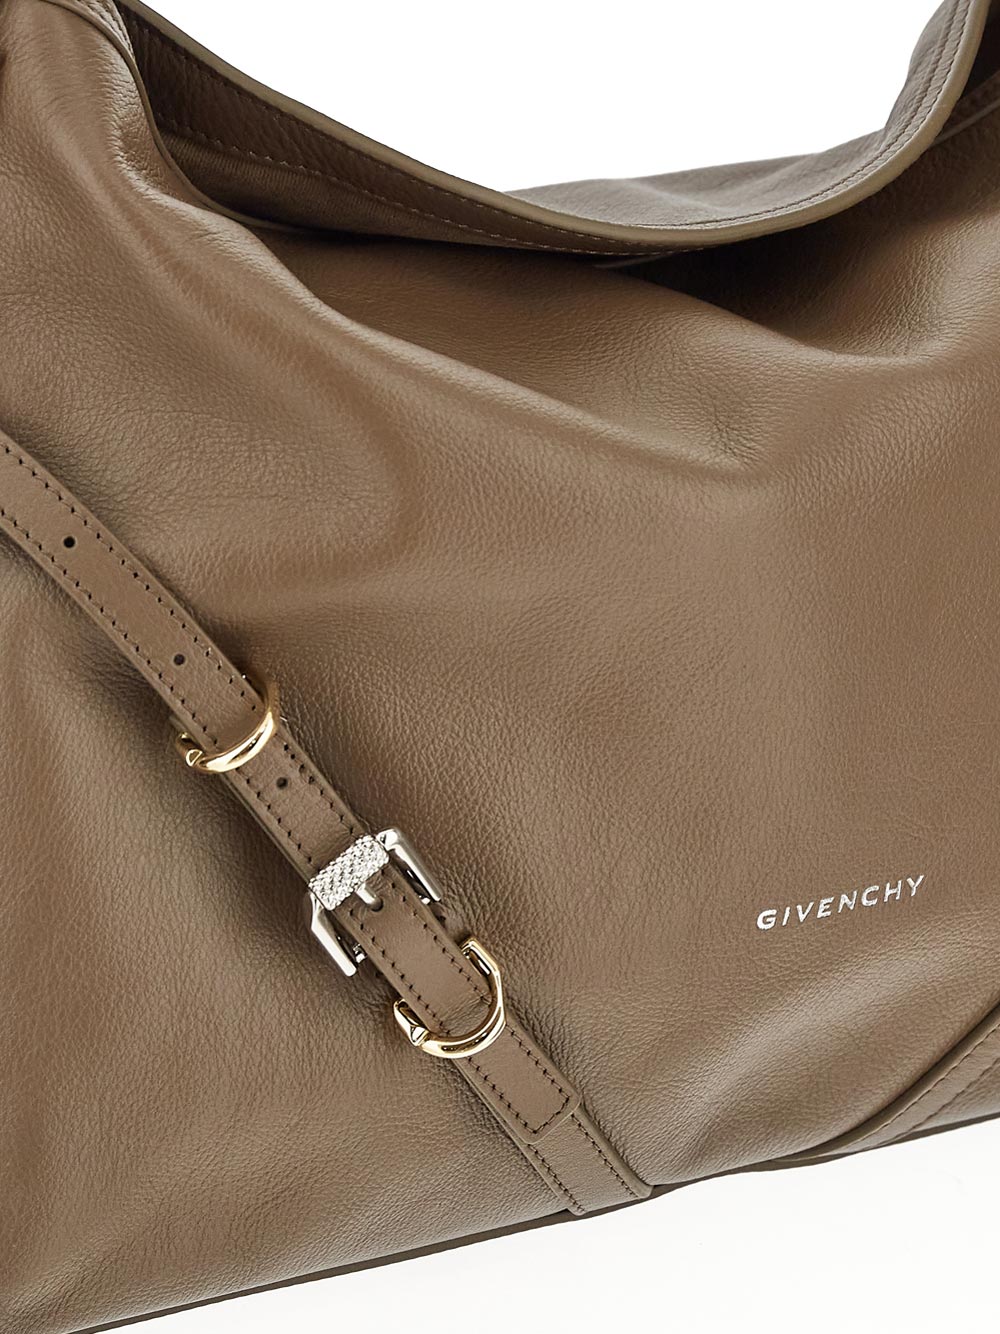 Givenchy Medium Voyou Bag In Leather